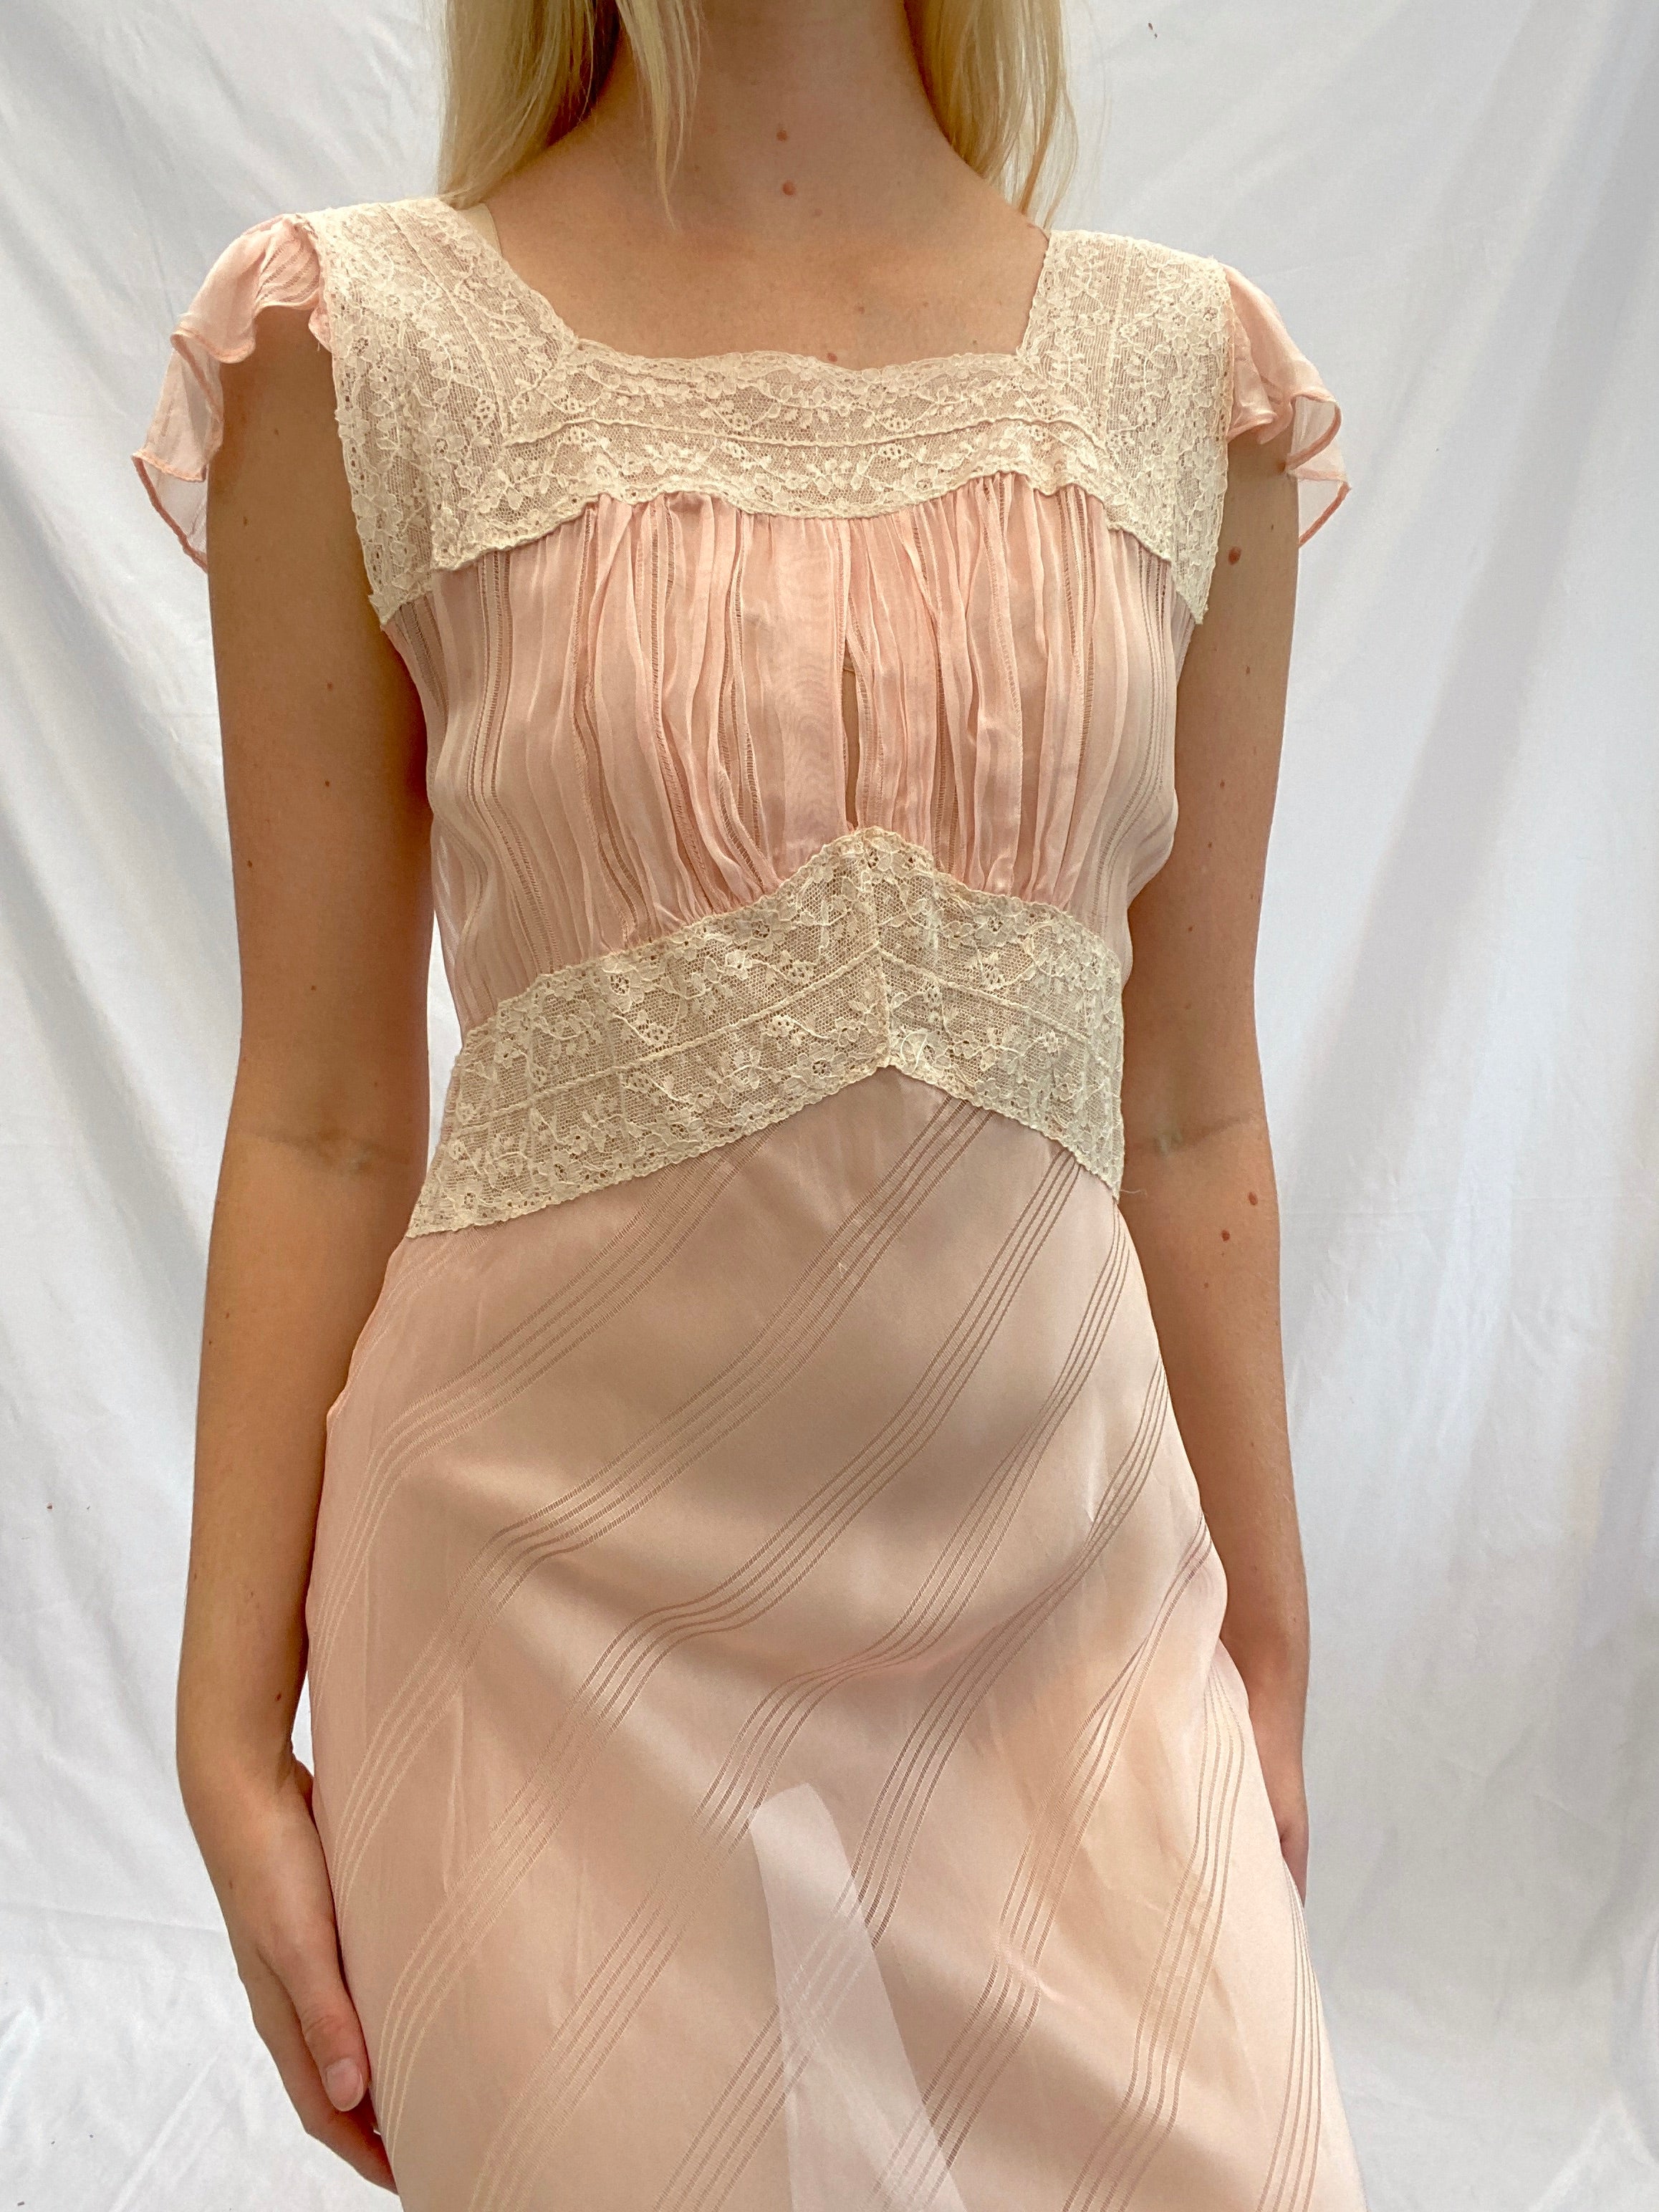 Pink Slip with Twirl Stripe Pattern and Cream Lace